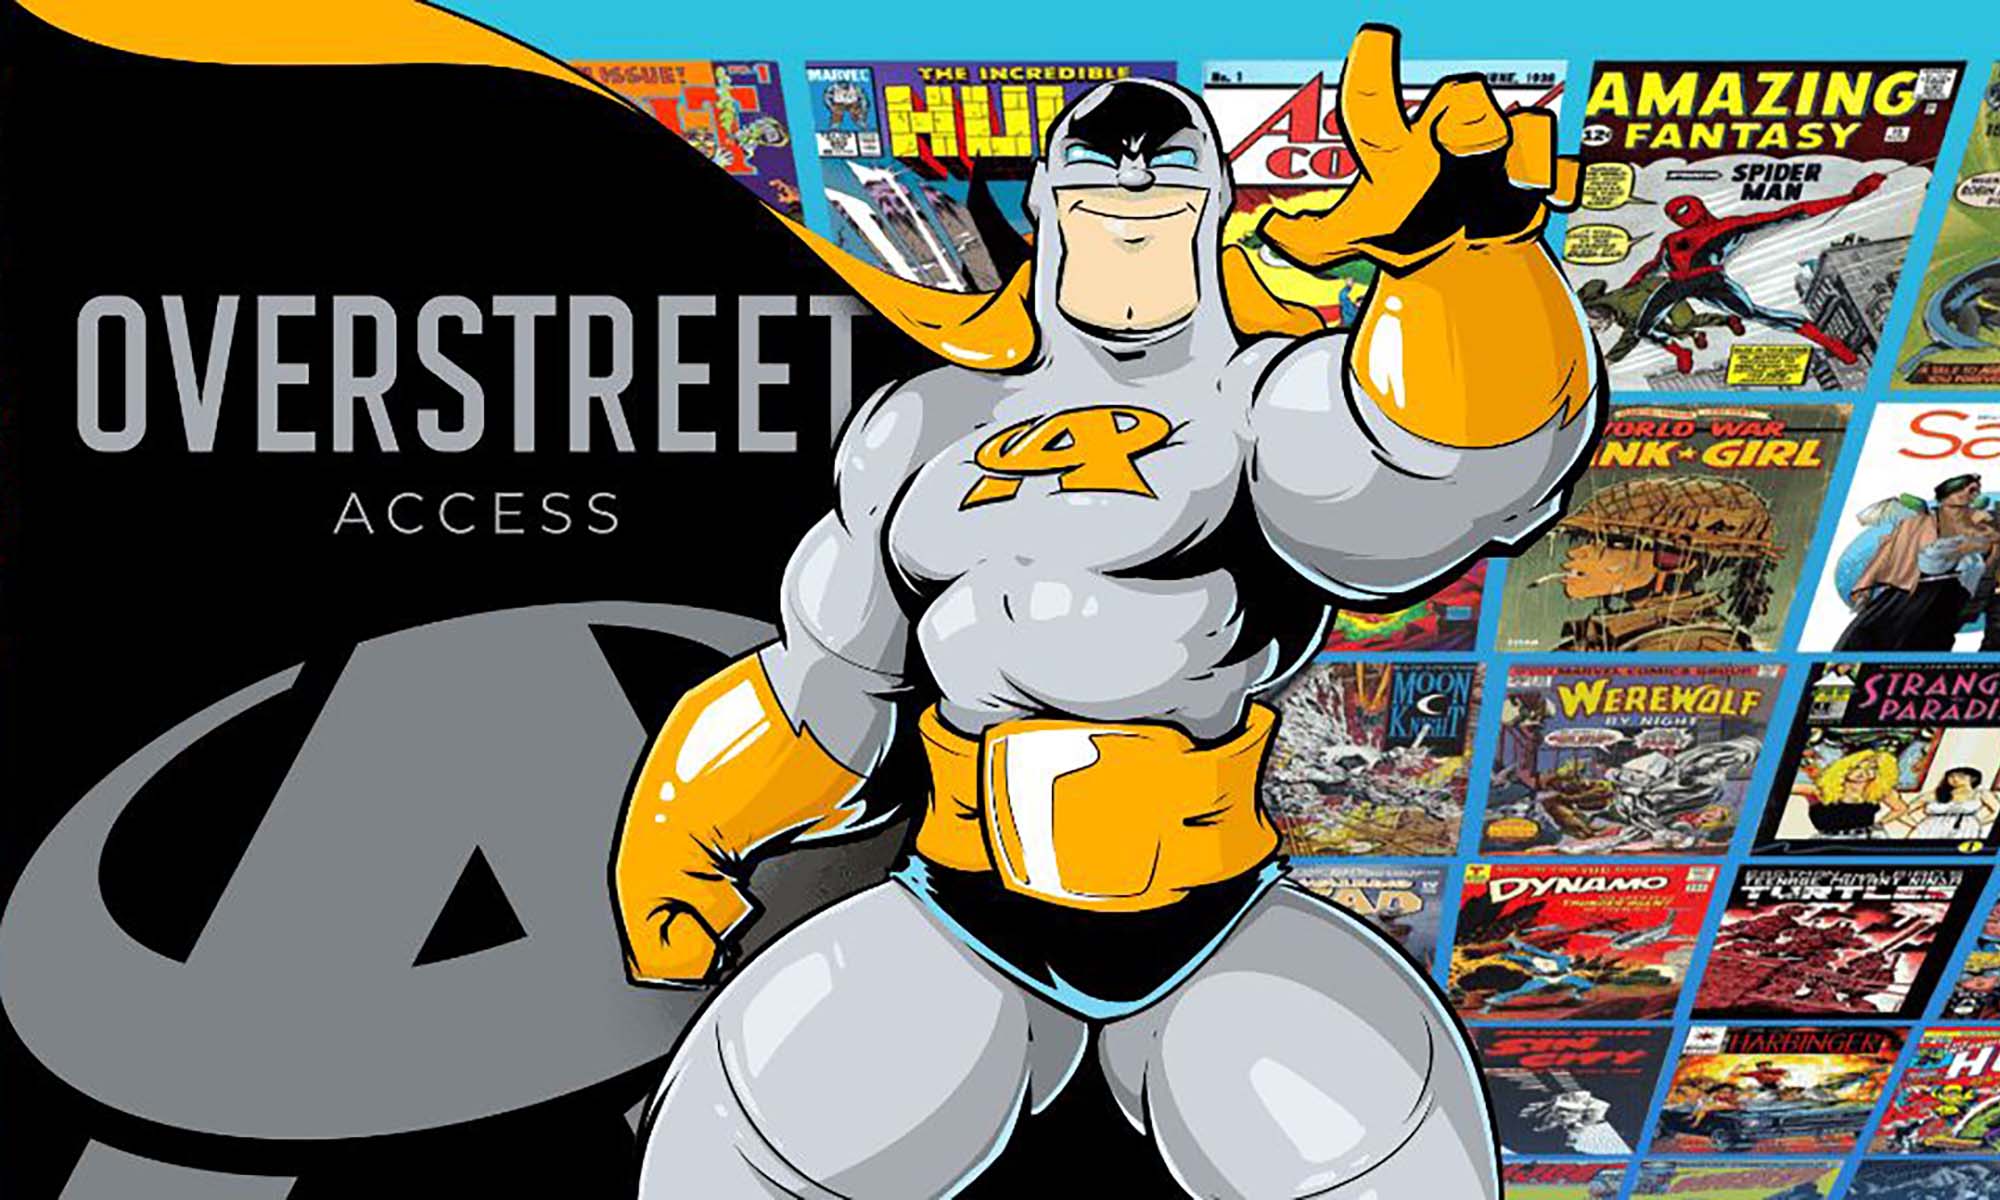 Image for The Overstreet Comic Book Price Guide is finally coming out with a digital service & app